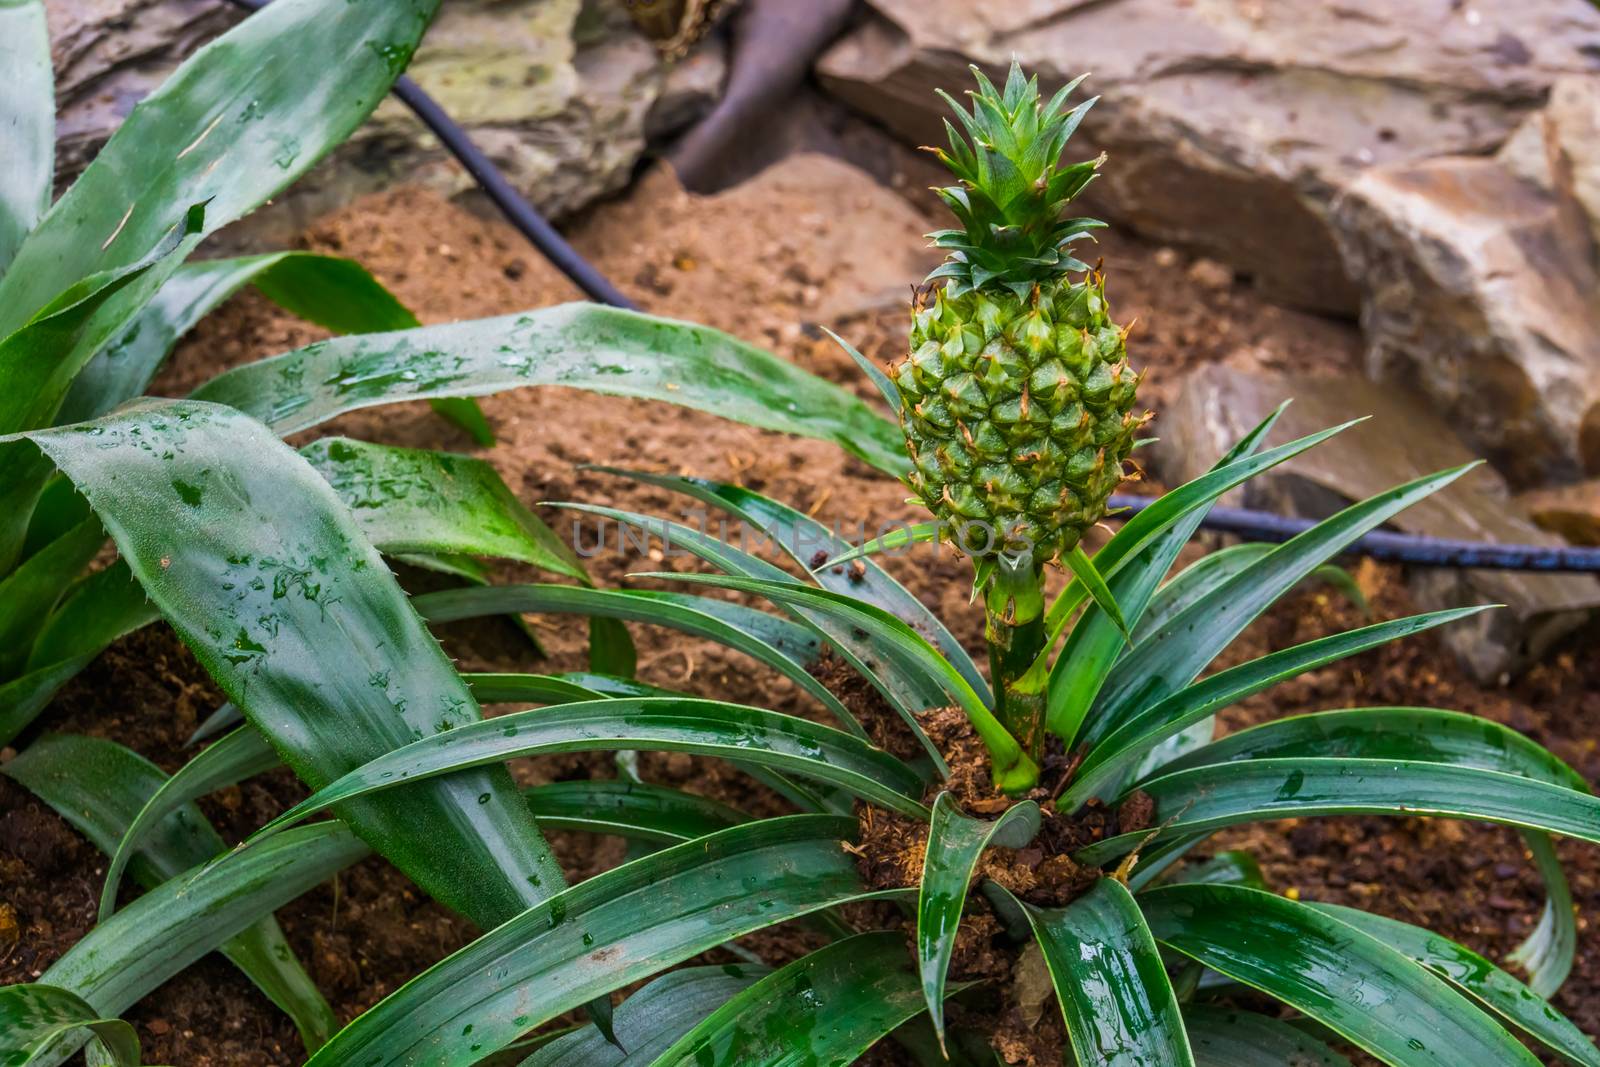 unripe pineapple growing a plant, edible fruits, popular tropical specie from America by charlottebleijenberg